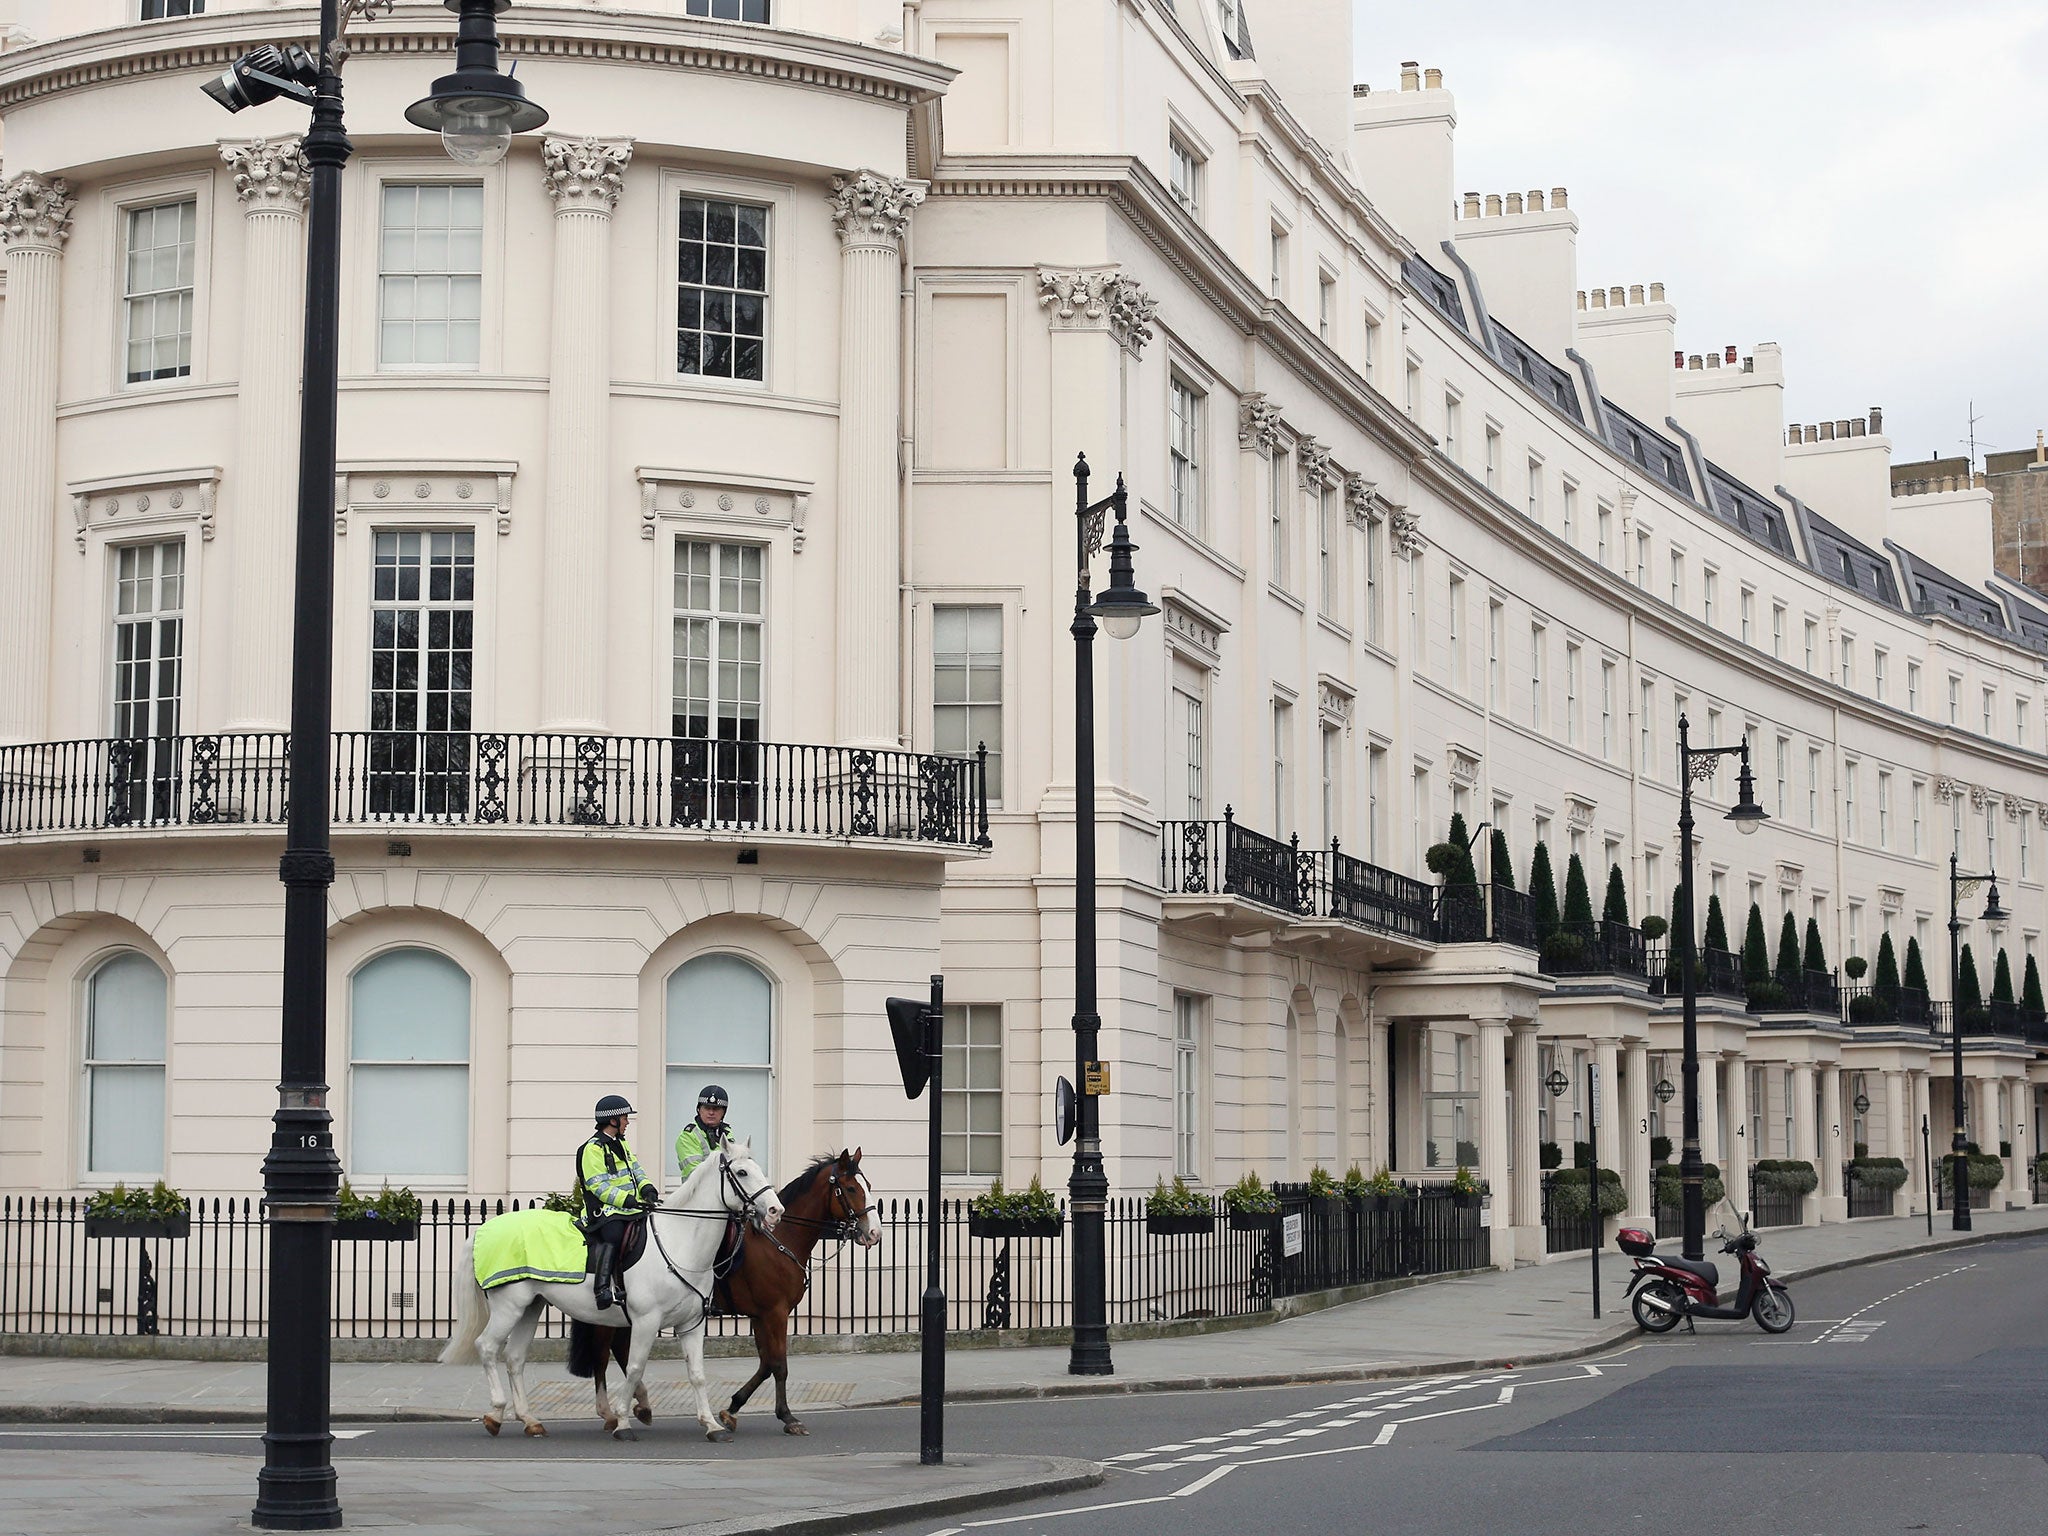 Westminster in London, where property costs £8,925 per square metre - but its still not the most expensive in Britain